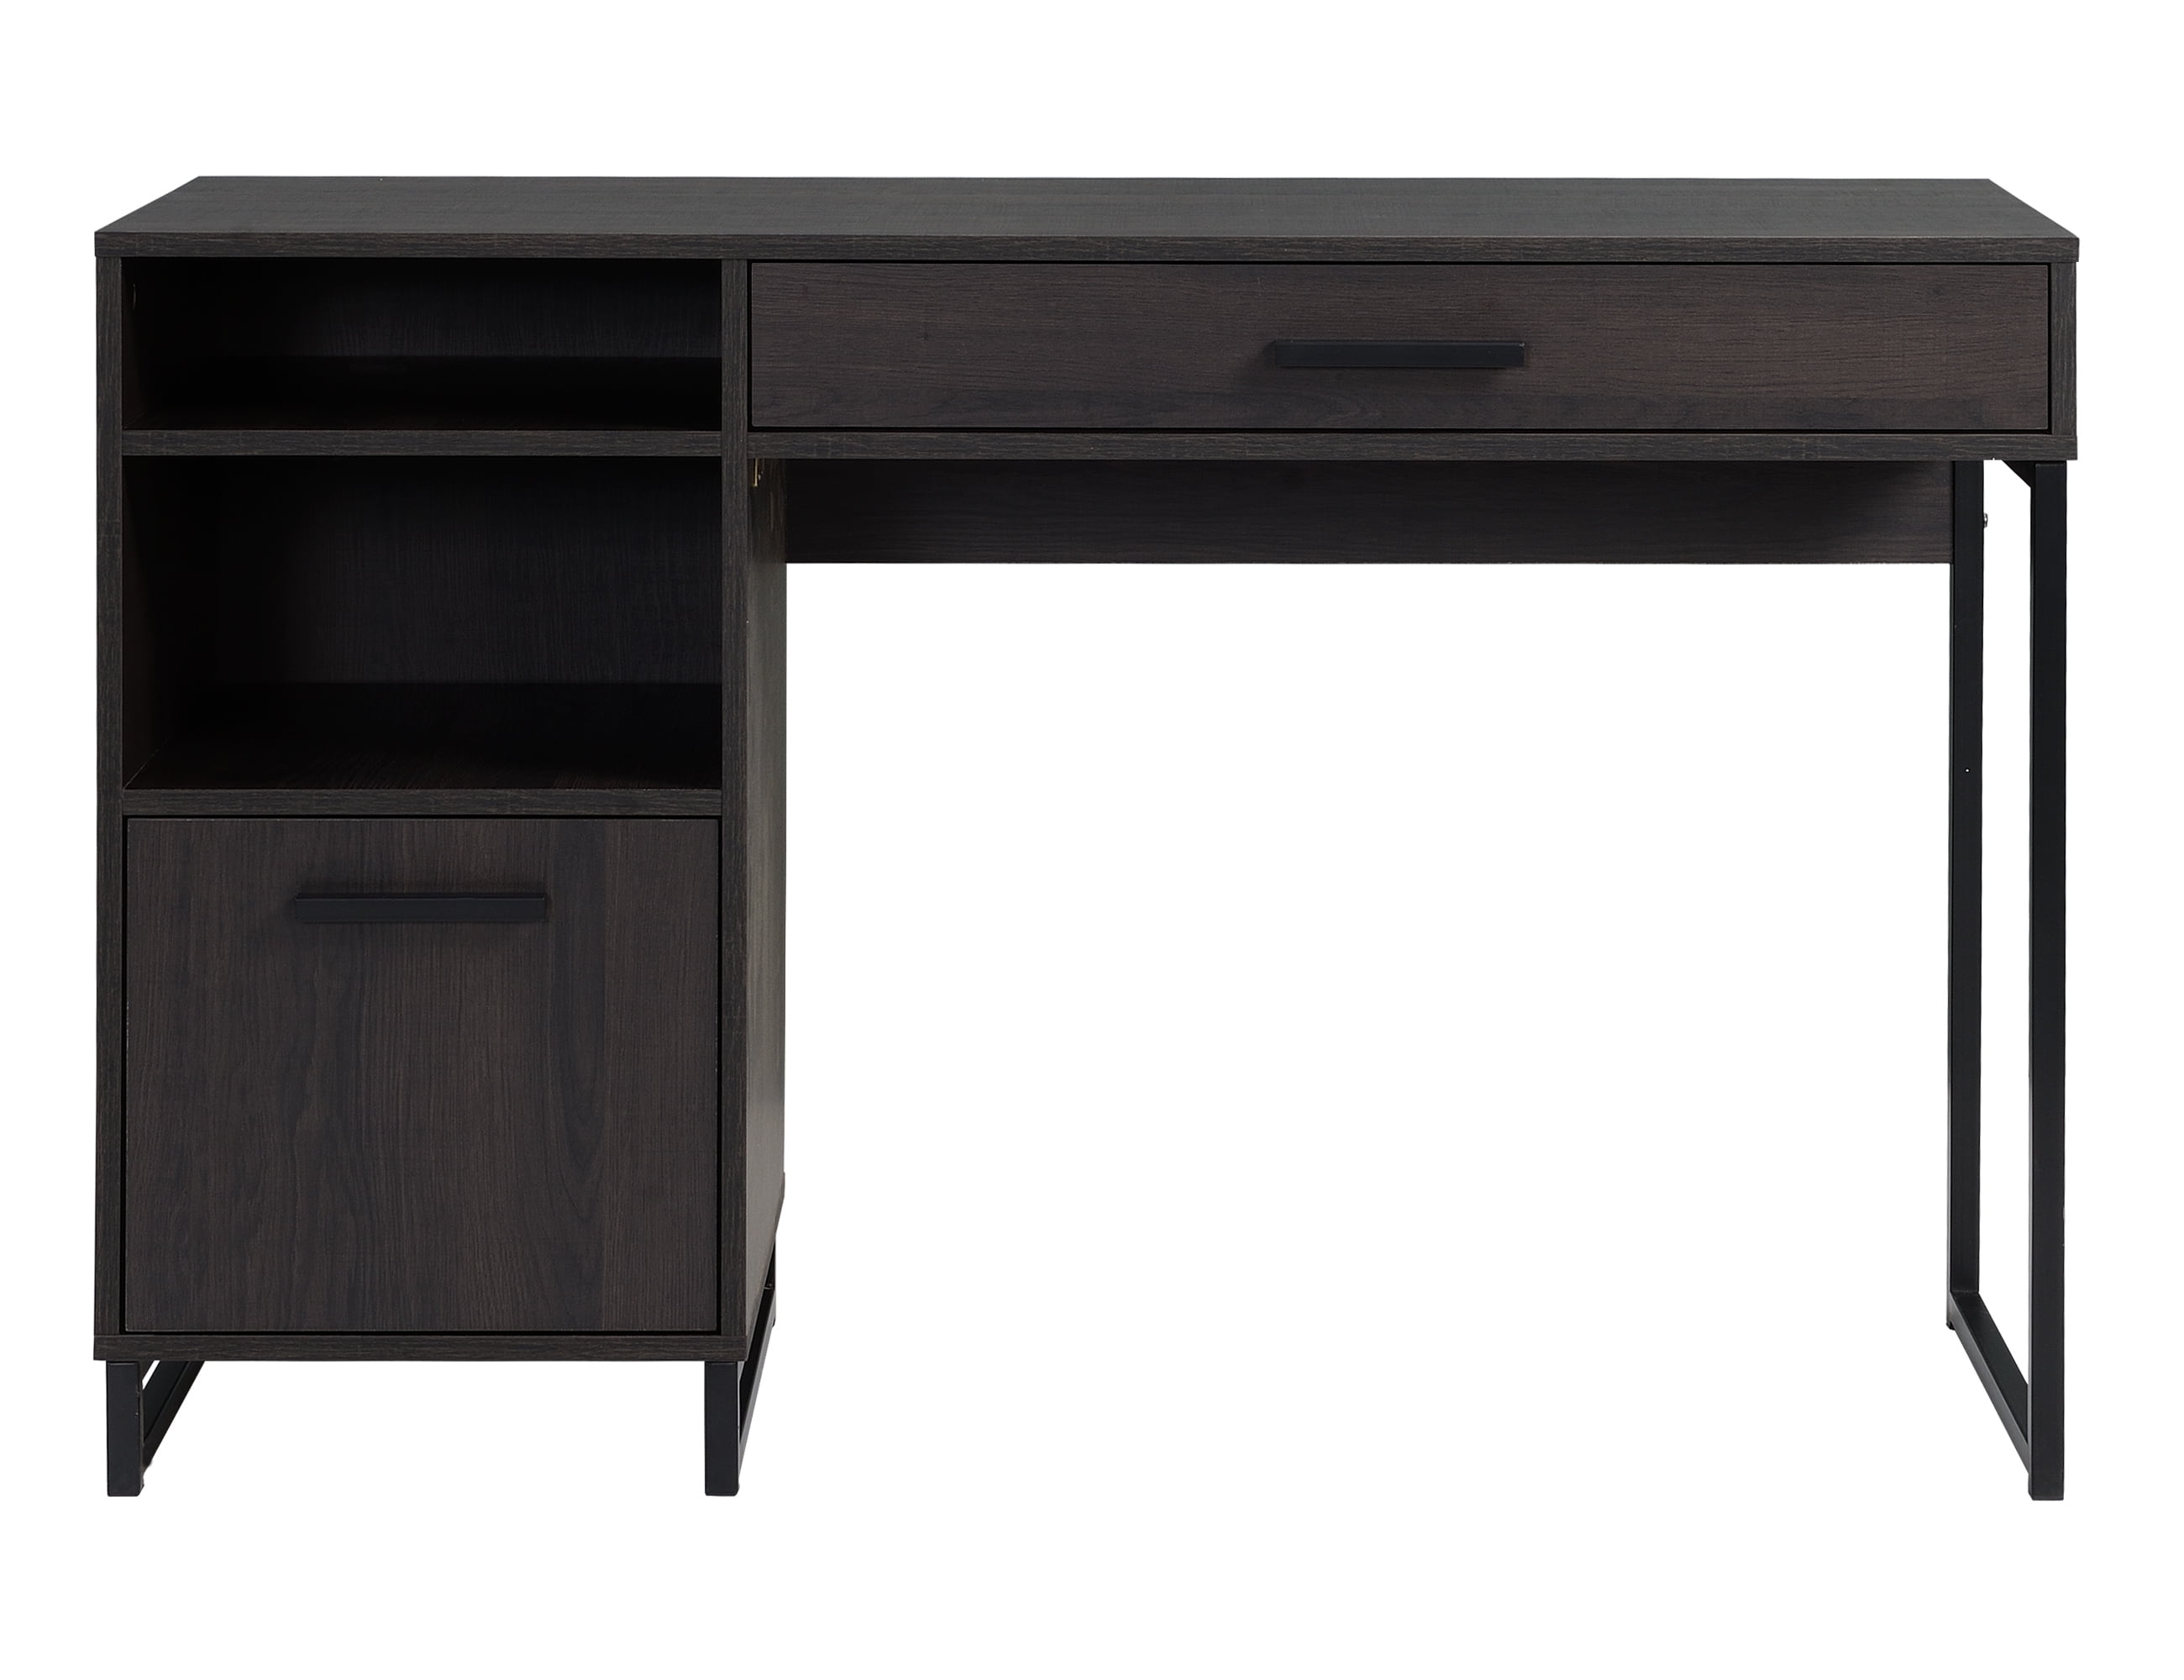 Mainstays Wood & Metal Writing Desk with 1 Drawer and 1 Door, Espresso Finish.